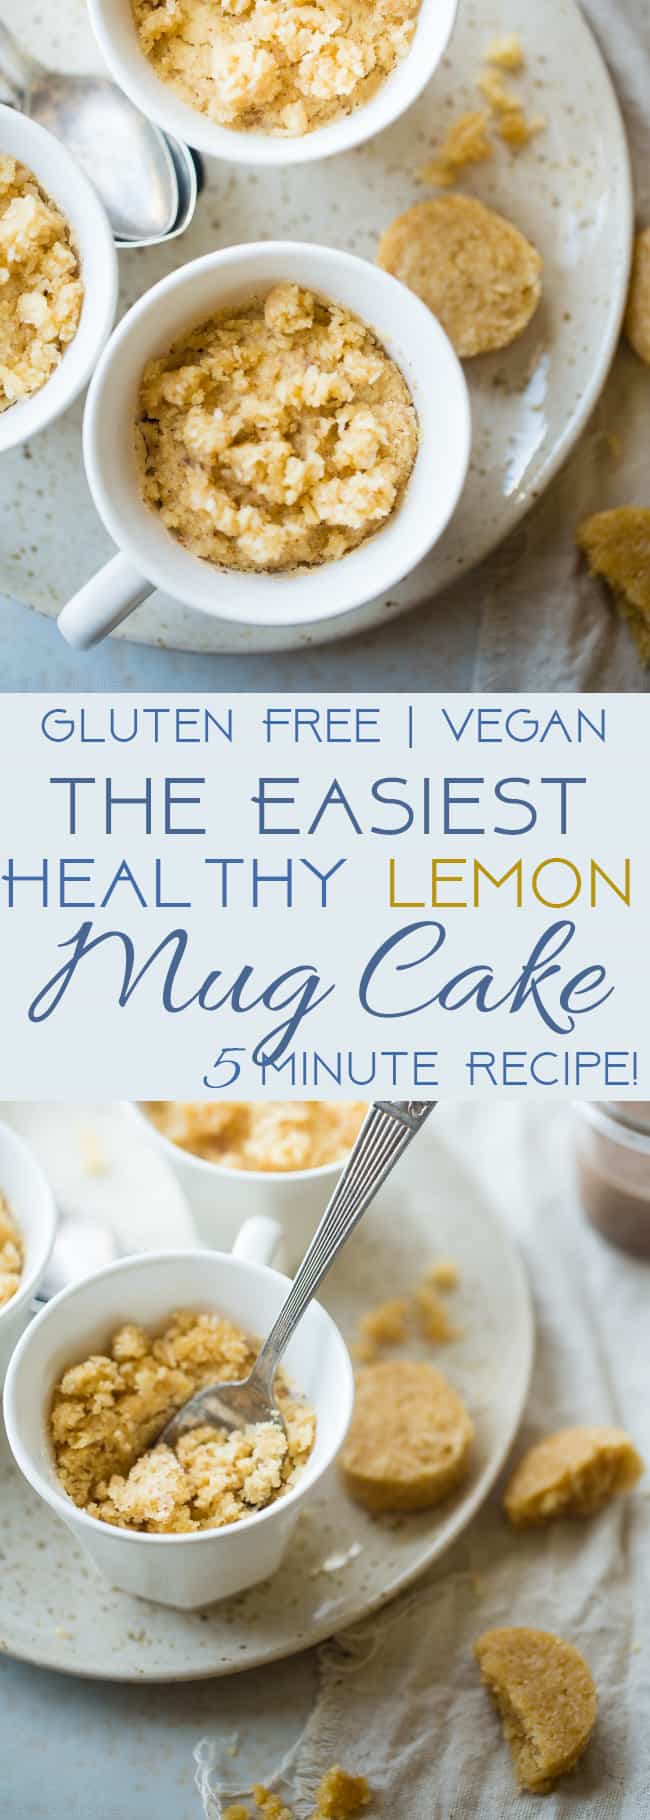 Gluten Free Lemon Macaroon Vegan Mug Cake - Have cookies IN your cake with this easy, gluten free vegan mug cake that's mixed with crumbled up lemon macaroons. It's a healthy dessert that's ready in under 5 minutes! | Foodfaithfitness.com | @FoodFaithFit | easy vegan mug cake. healthy vegan mug cake. vanilla mug cake. gluten fee mug cake. healthy mug cake. lemon mug cake. mug cake with coconut flour. flourless mug cake. Mug cake with applesauce. 